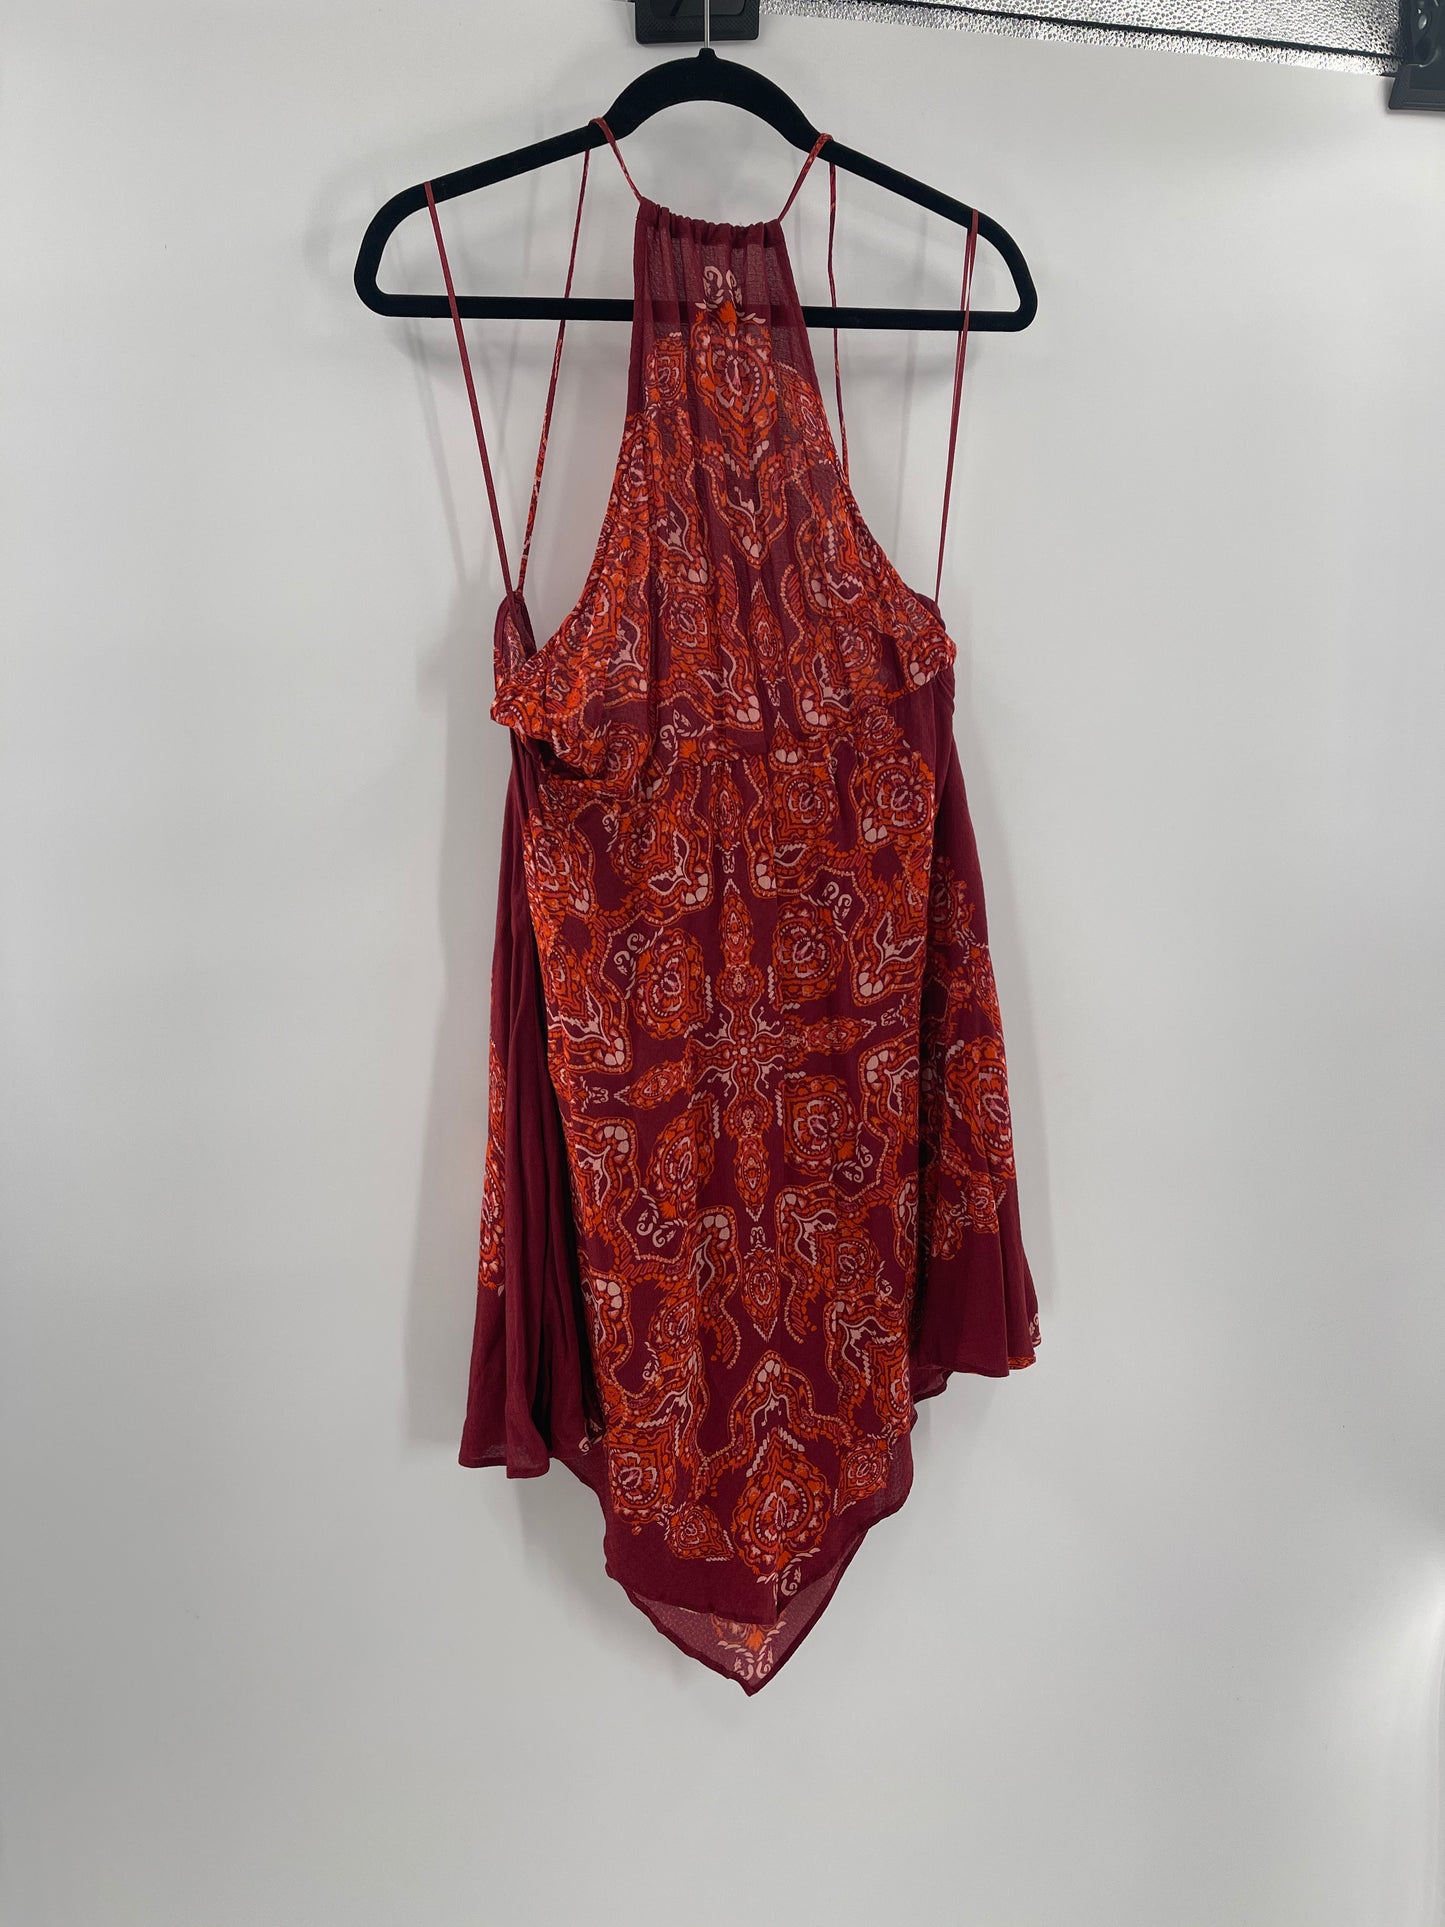 Free People Intimately Floral Red Sleeveless Spaghetti Straps Backless Mini Dress (Size L)